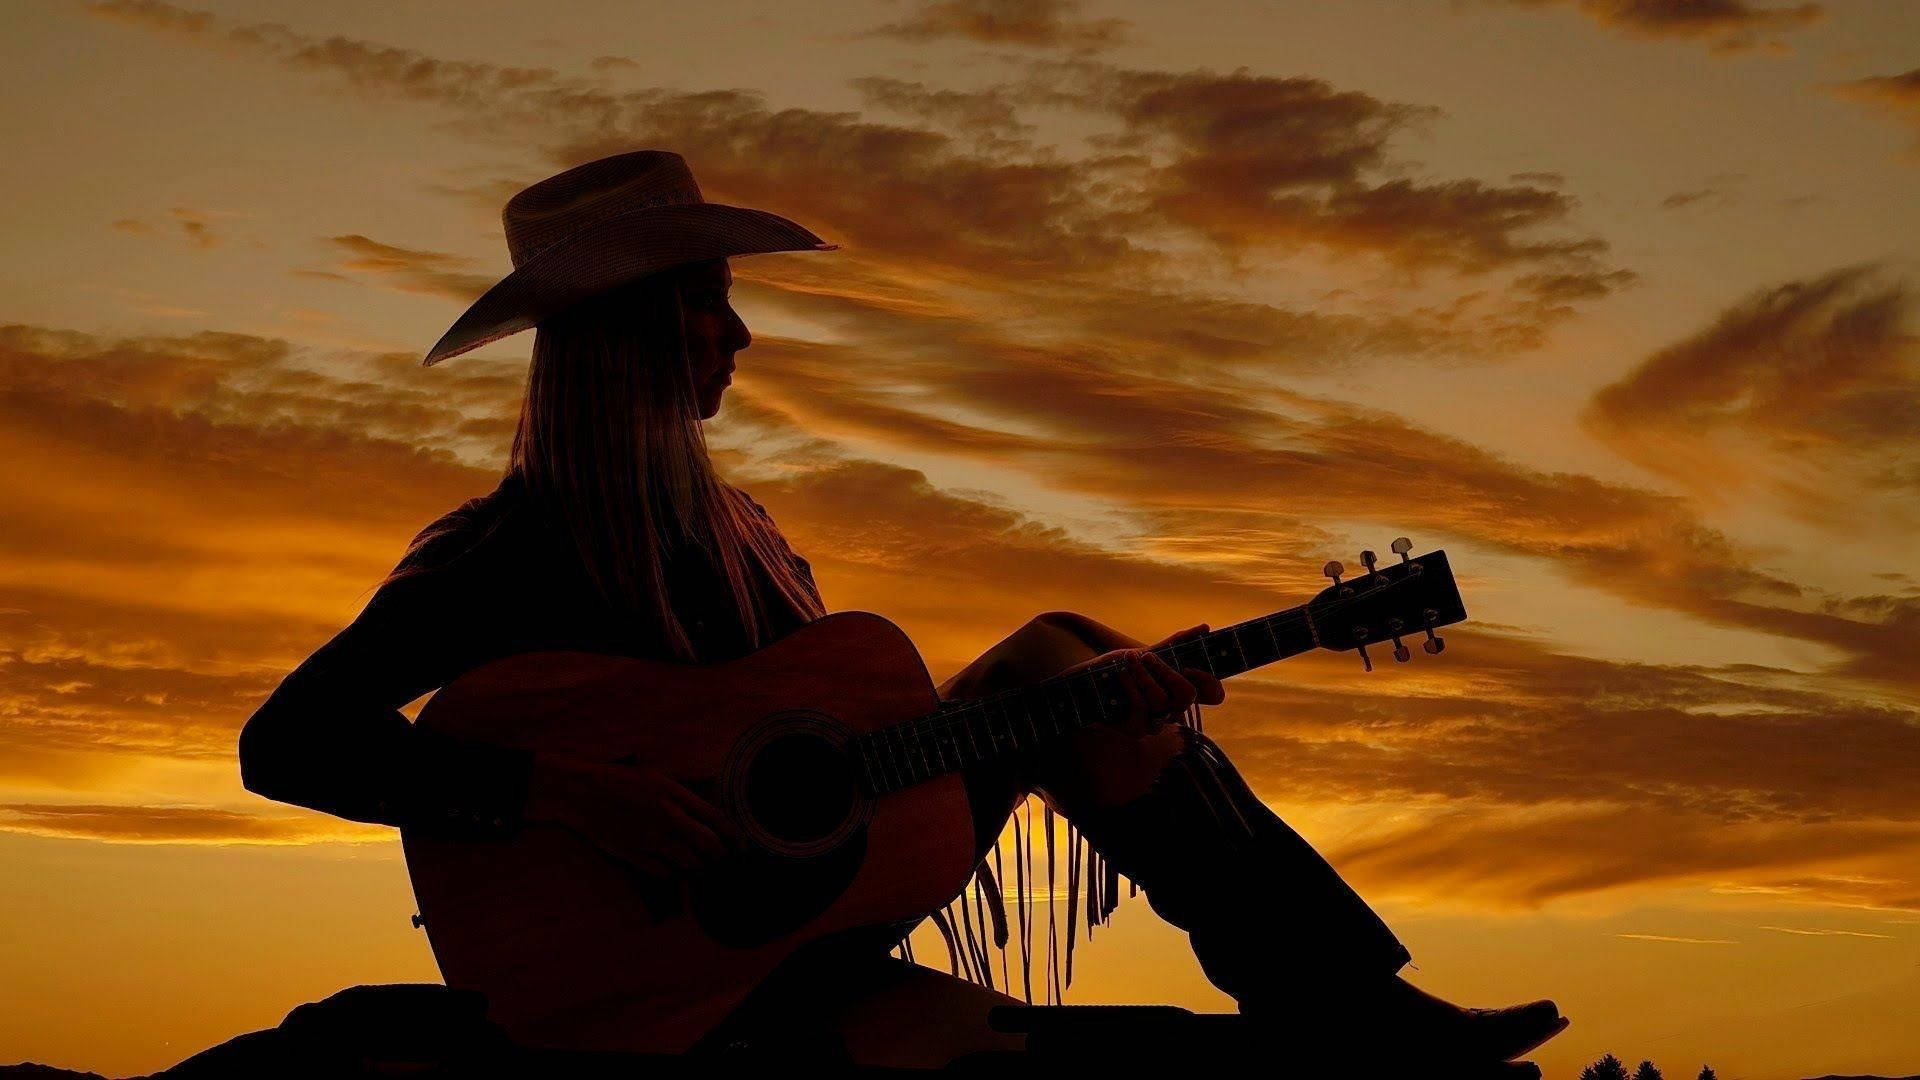 Songbird in the Sunset - The Empowering Power of Country Music Wallpaper